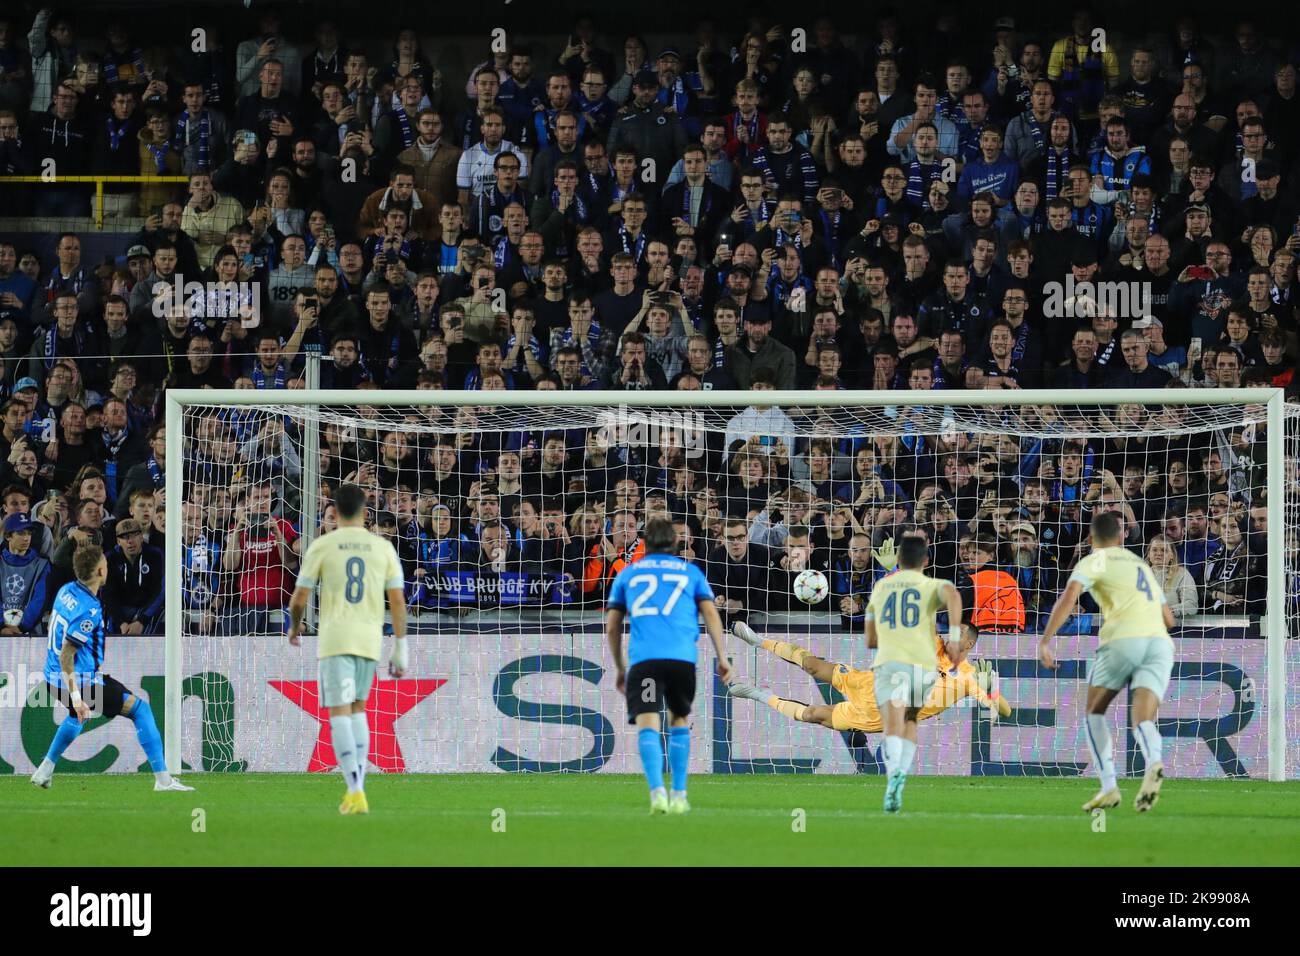 Bruges, Belgium. 26th Oct, 2022. Goalkeeper Diogo Costa (2nd R) of FC Porto saves a penalty kick by Club Brugge's Noa Lang during the UEFA Champions League Group B football match between Club Brugge and FC Porto in Bruges, Belgium, Oct. 26, 2022. Credit: Zheng Huansong/Xinhua/Alamy Live News Stock Photo